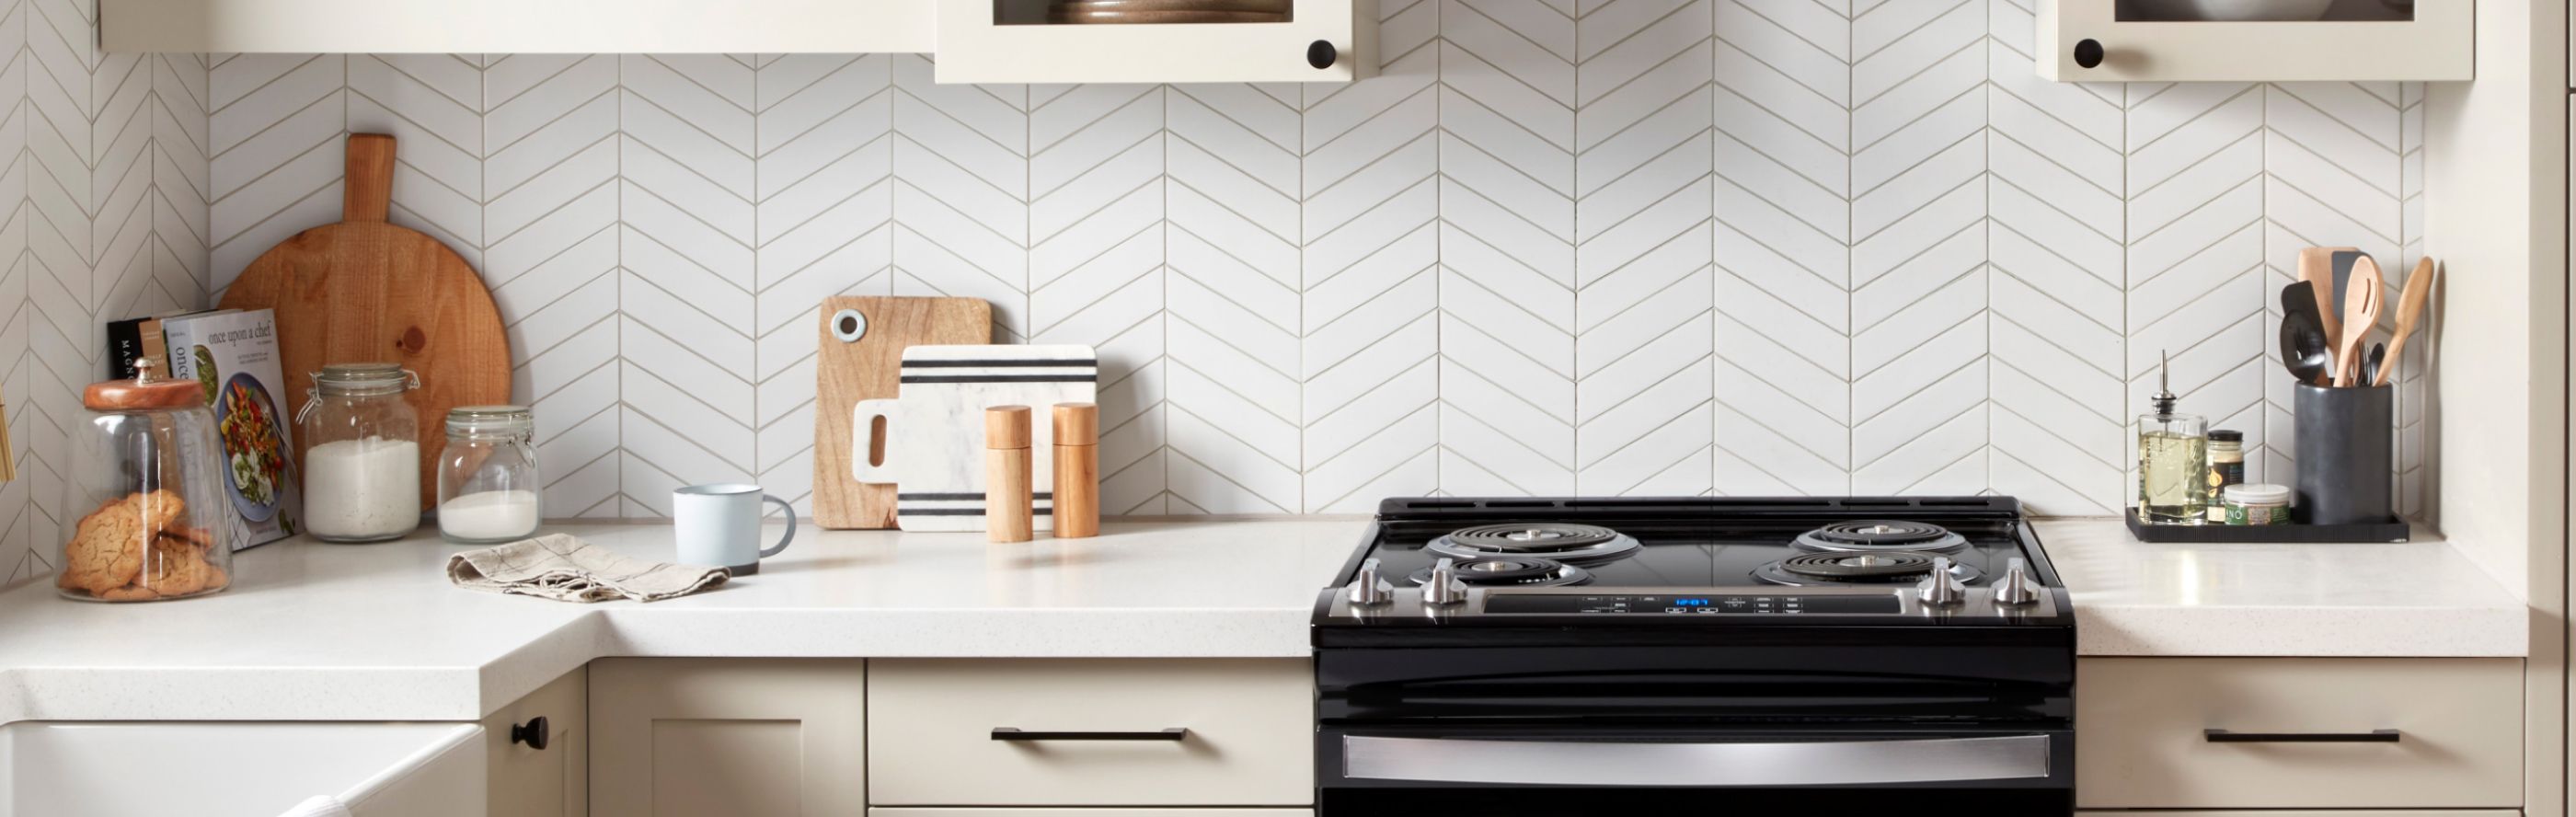 Black electric stove between cream cabinetry in front of a white herringbone backsplash